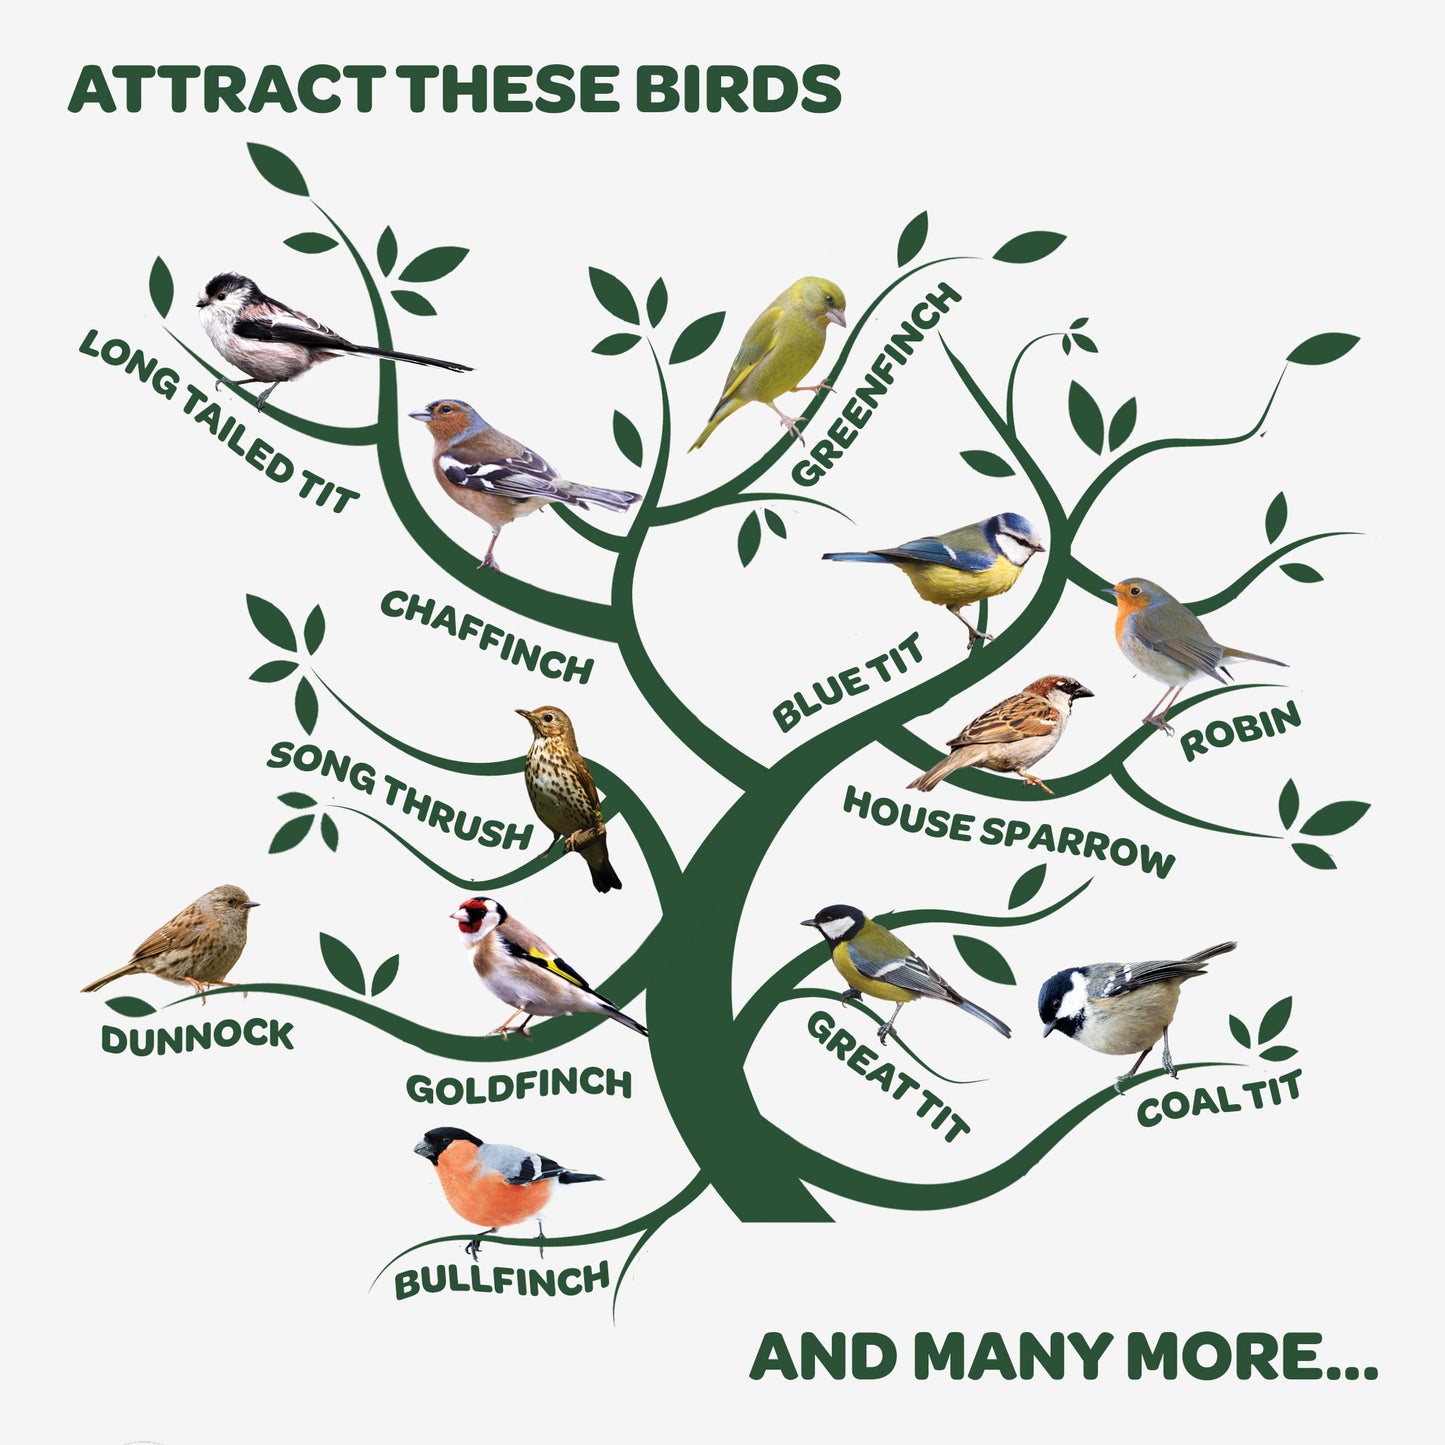 Peckish Winter Warmer attracts these birds infographic